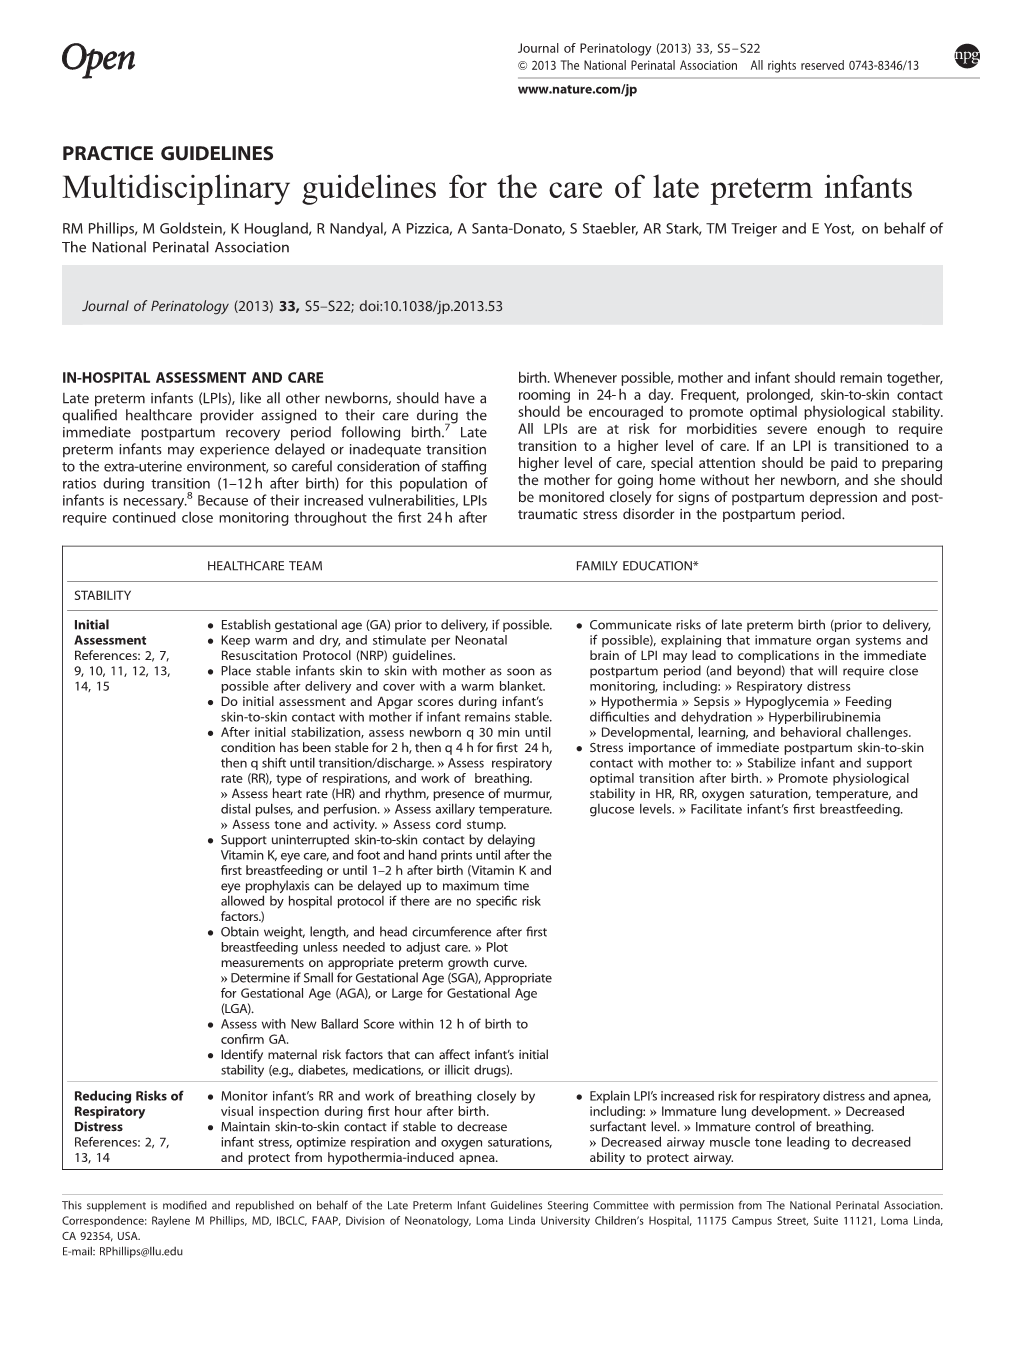 Multidisciplinary Guidelines for the Care of Late Preterm Infants